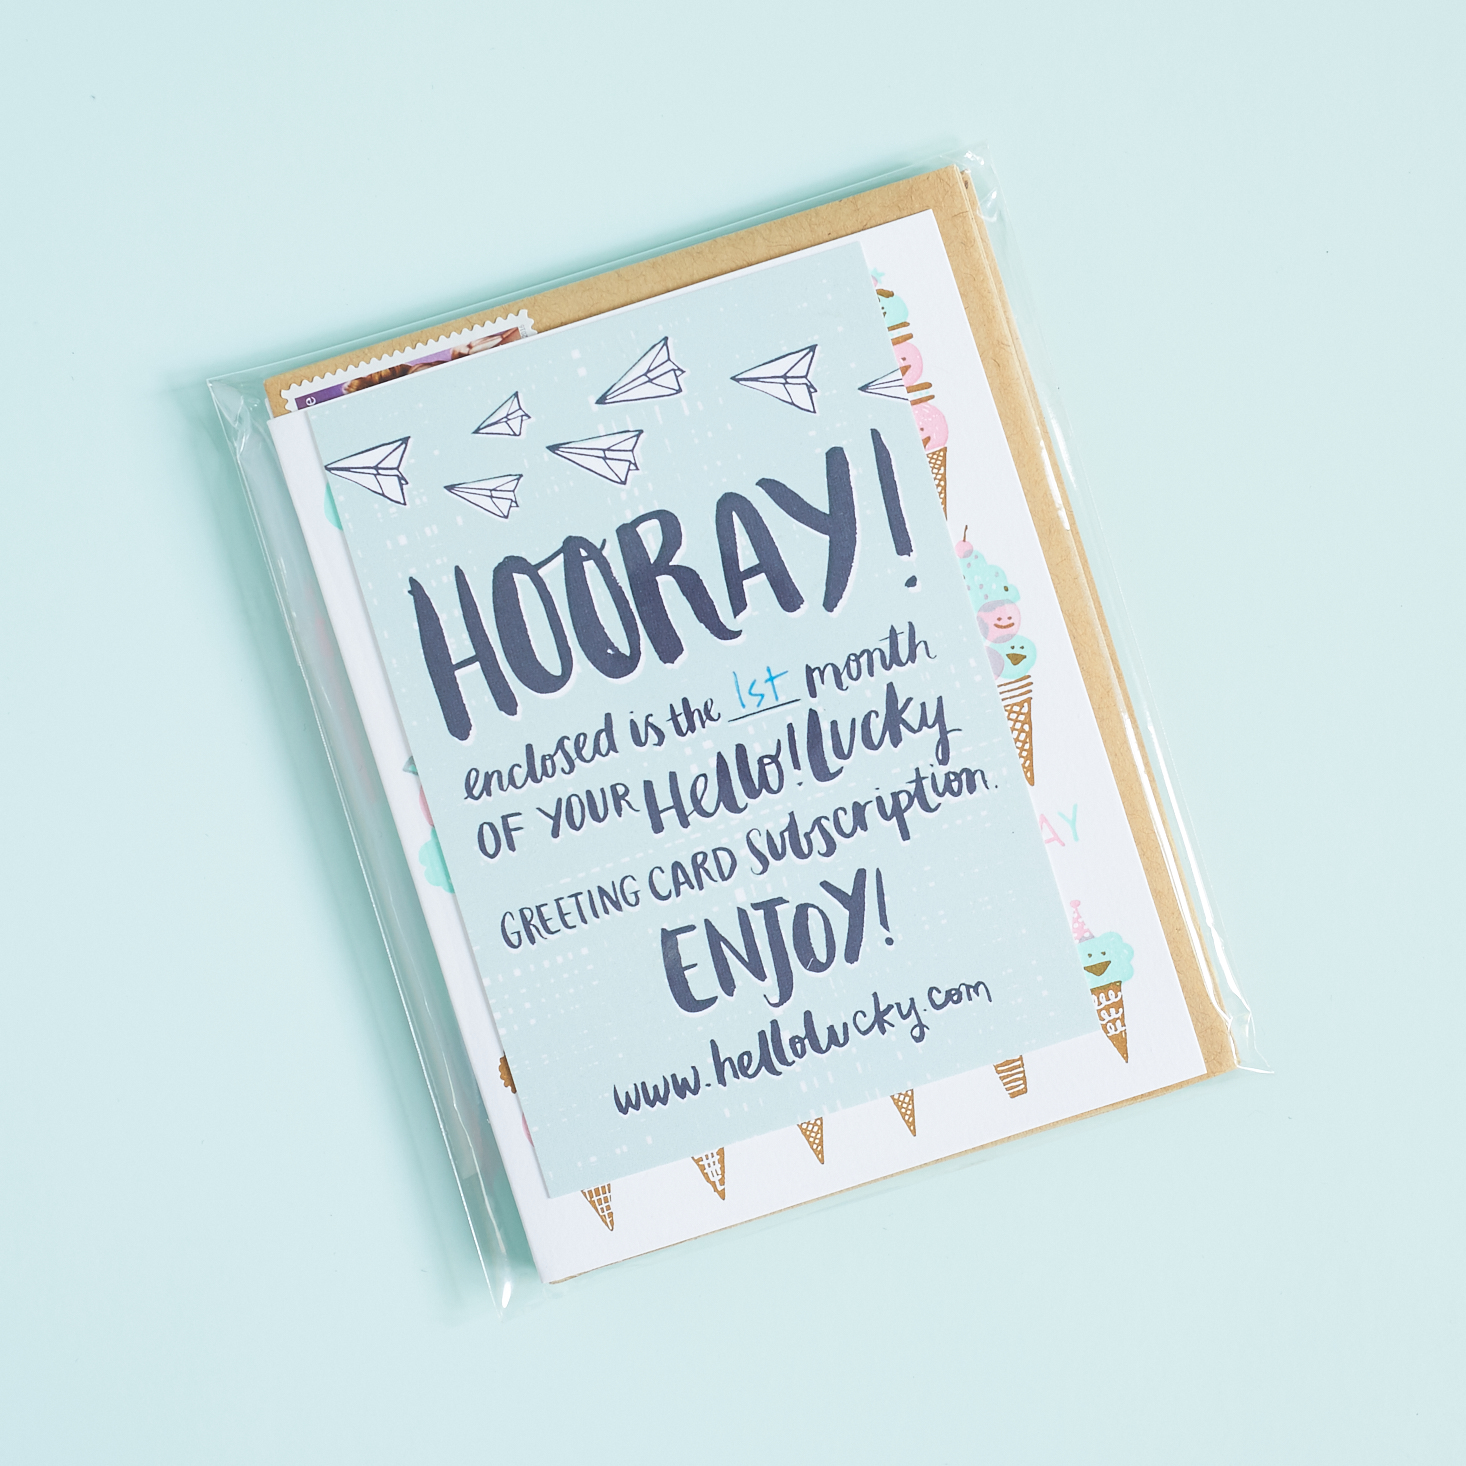 Hello Lucky Greeting Card Subscription Review – August 2016